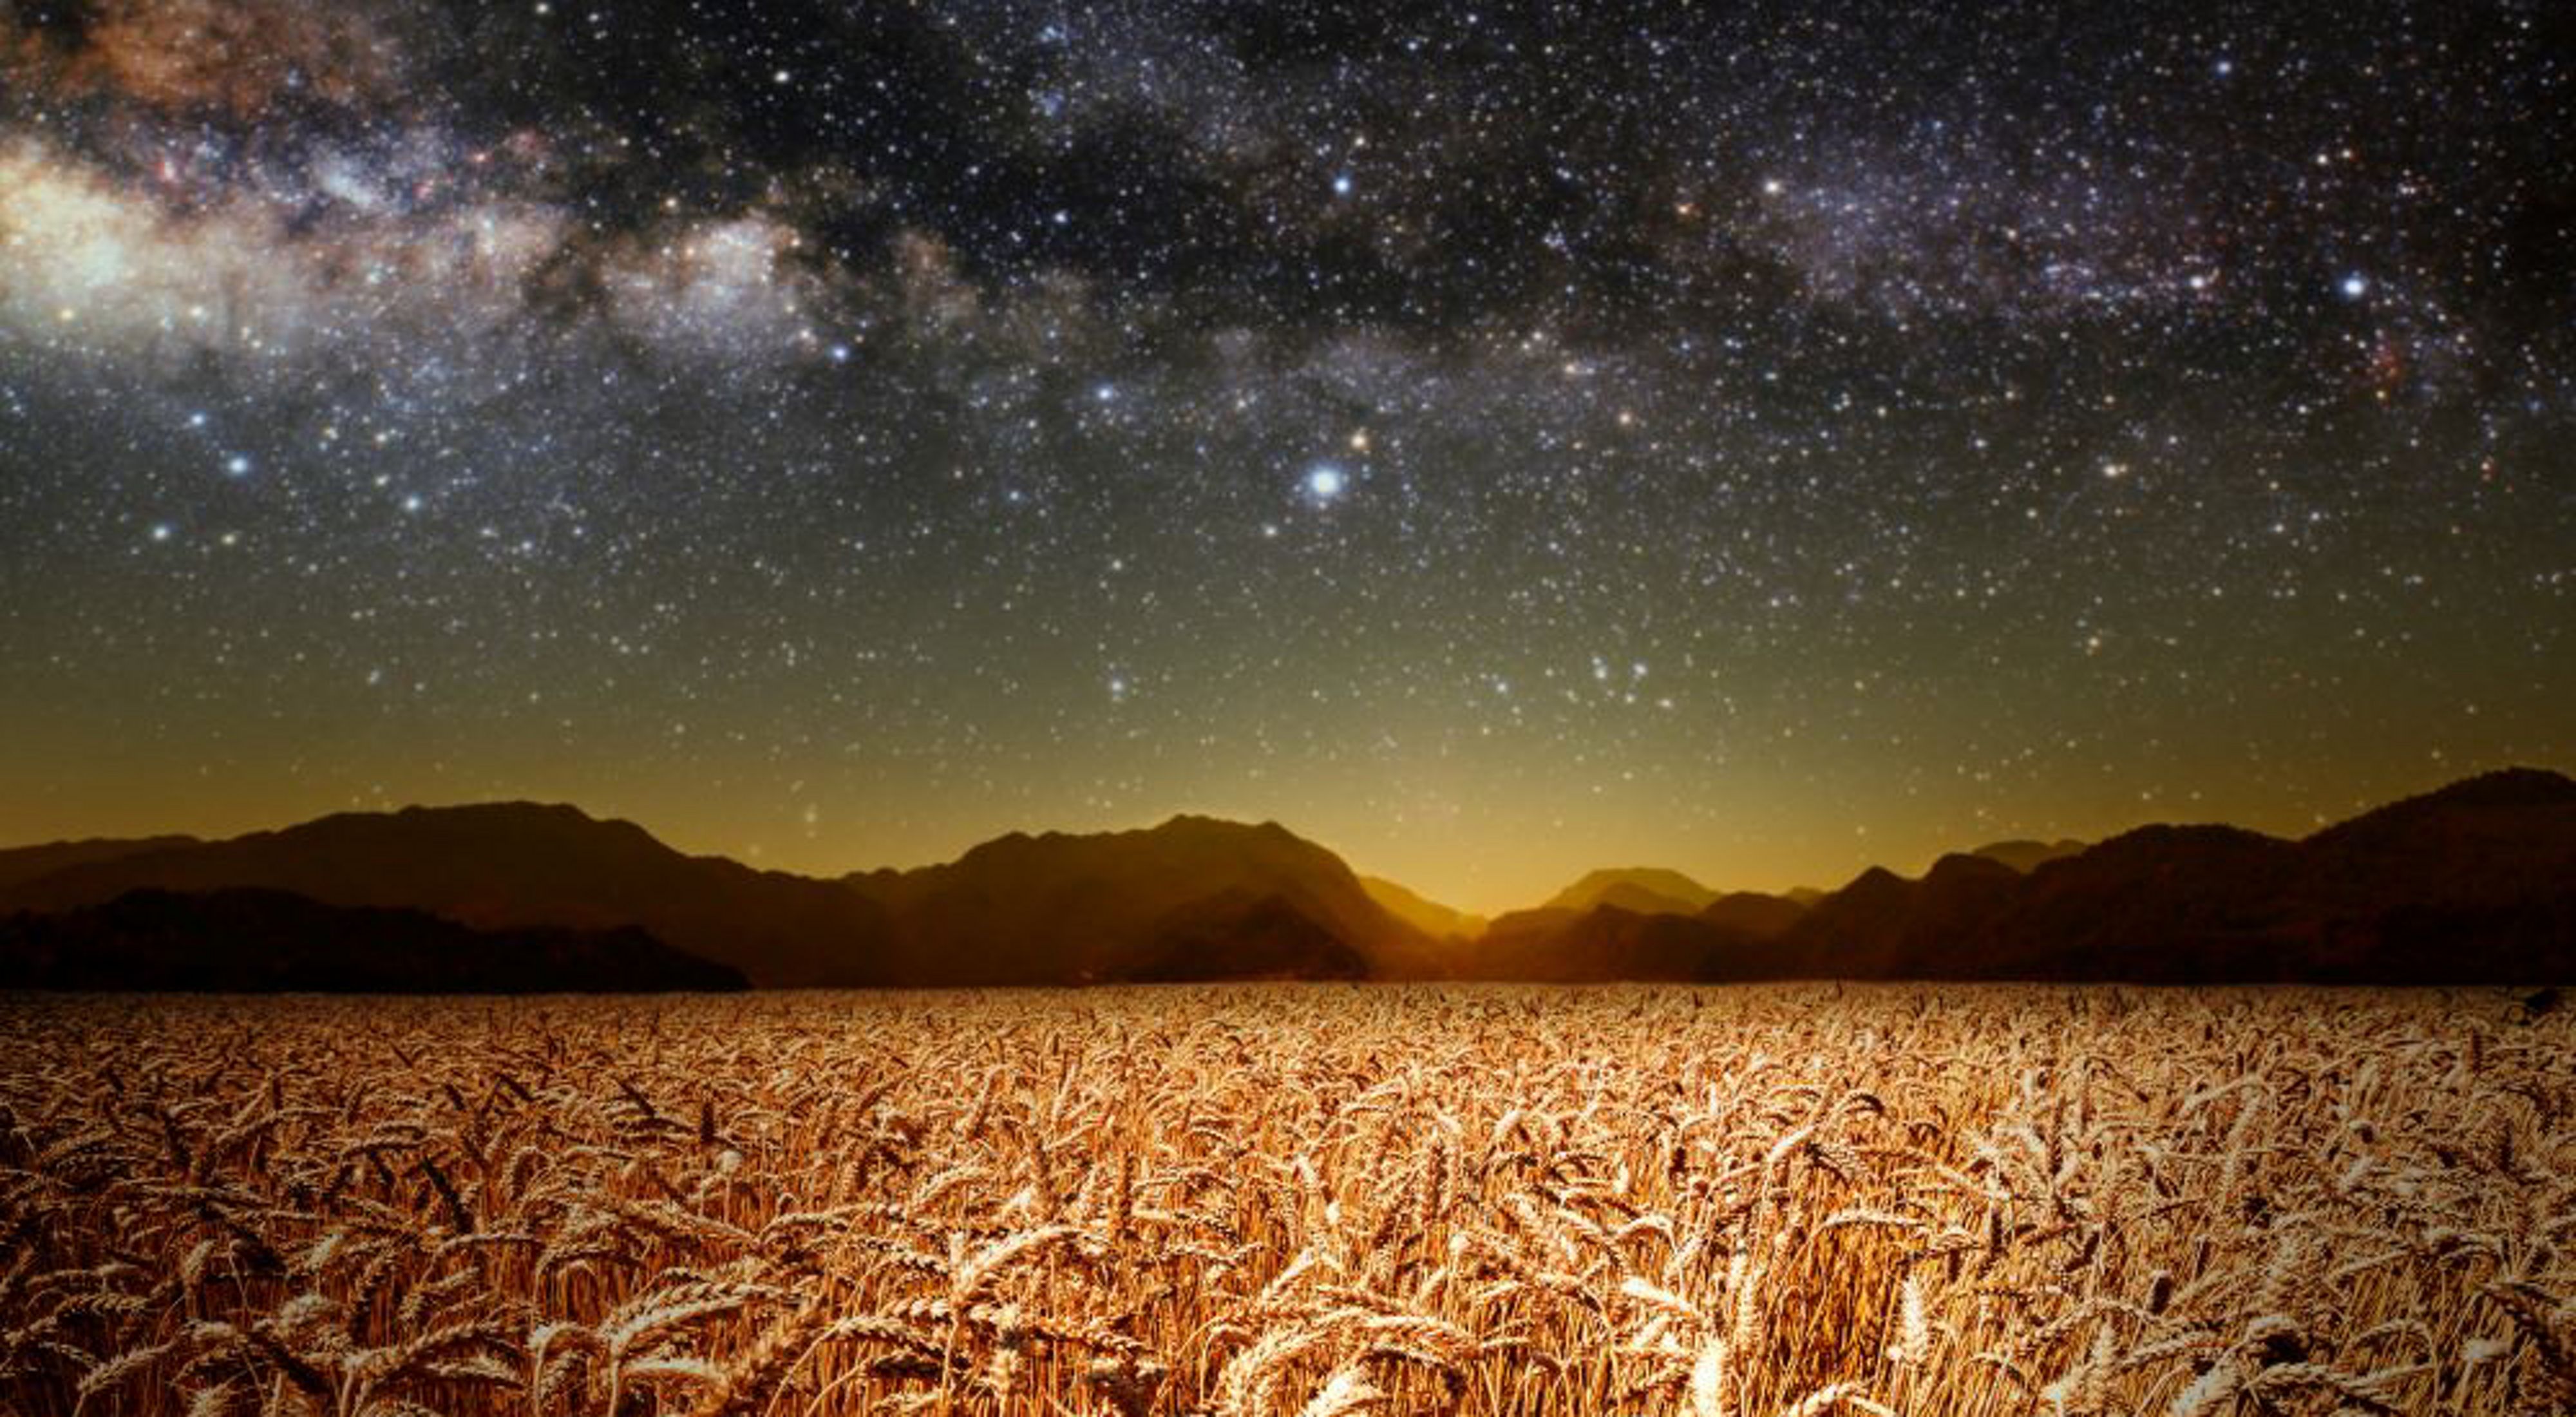 Looking up from a field of wheat leading up to rocky mountains looking up to the Milky Way.